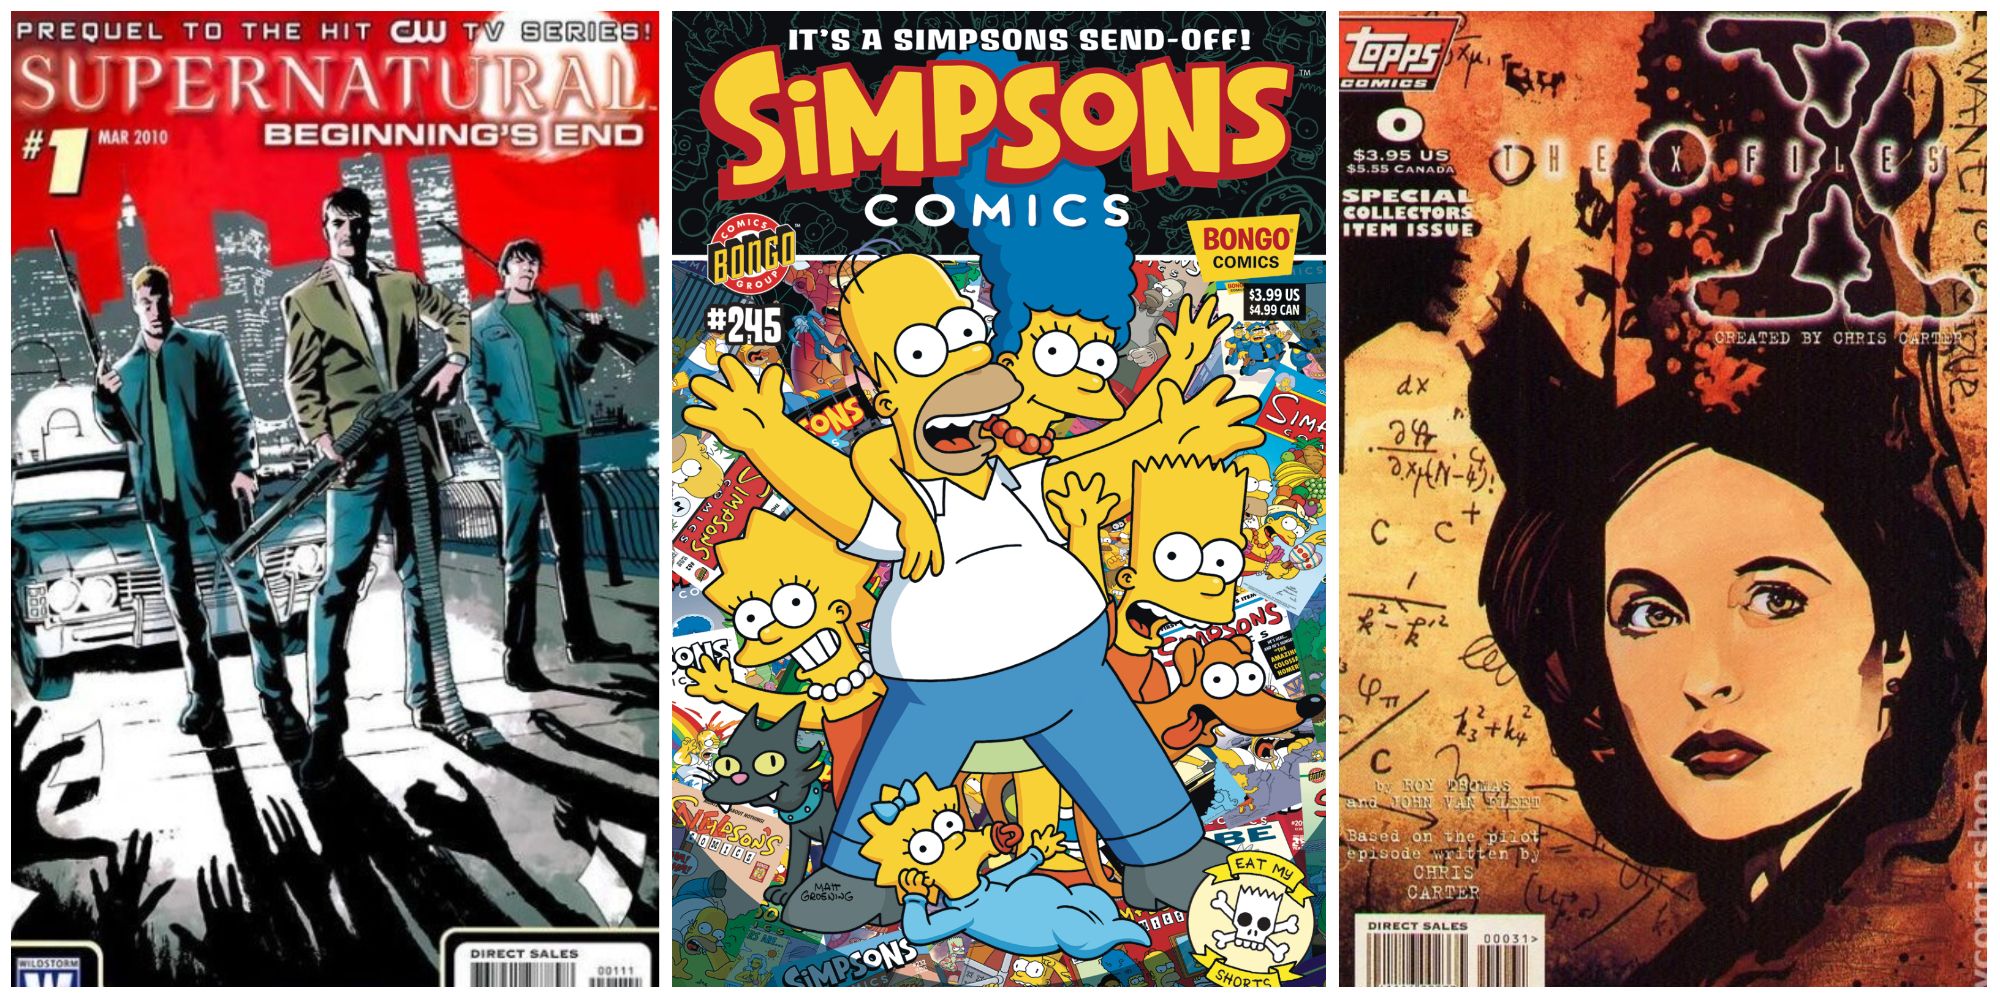 Split images of X-Files, Supernatural, and Simpsons comic covers